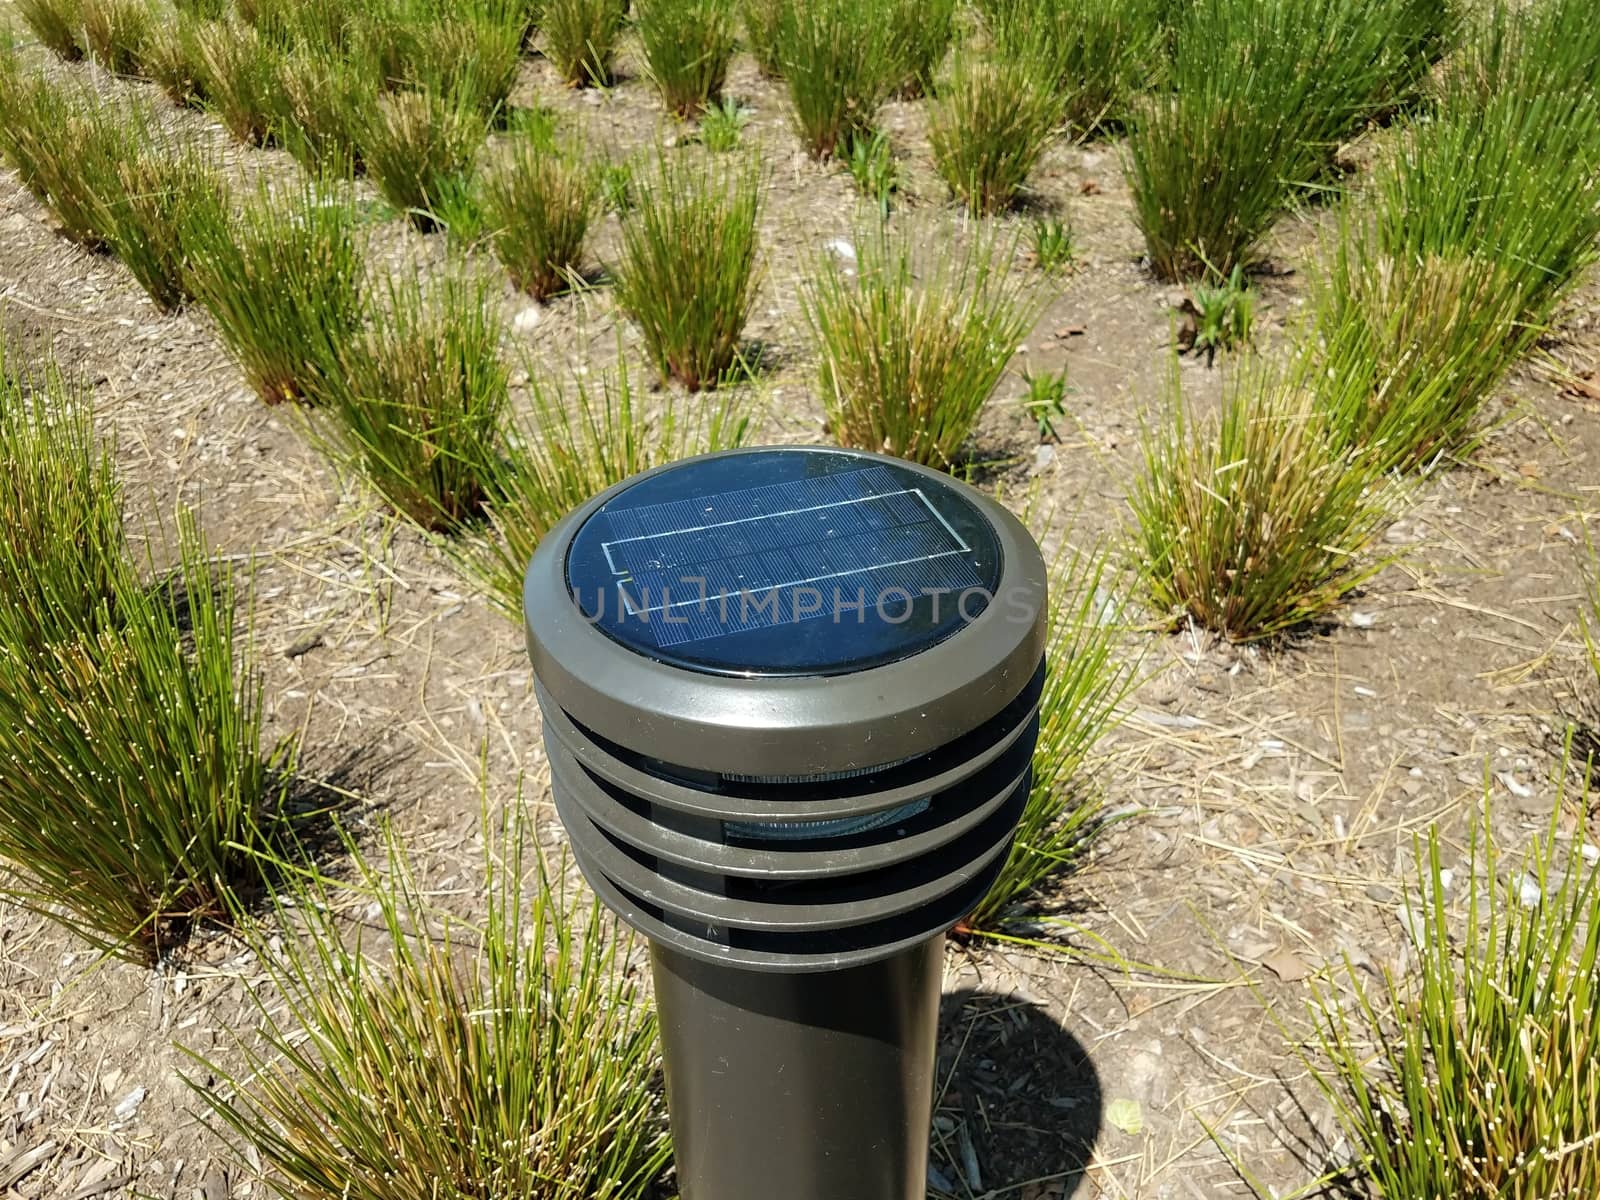 solar powered light with green grasses in the soil by stockphotofan1